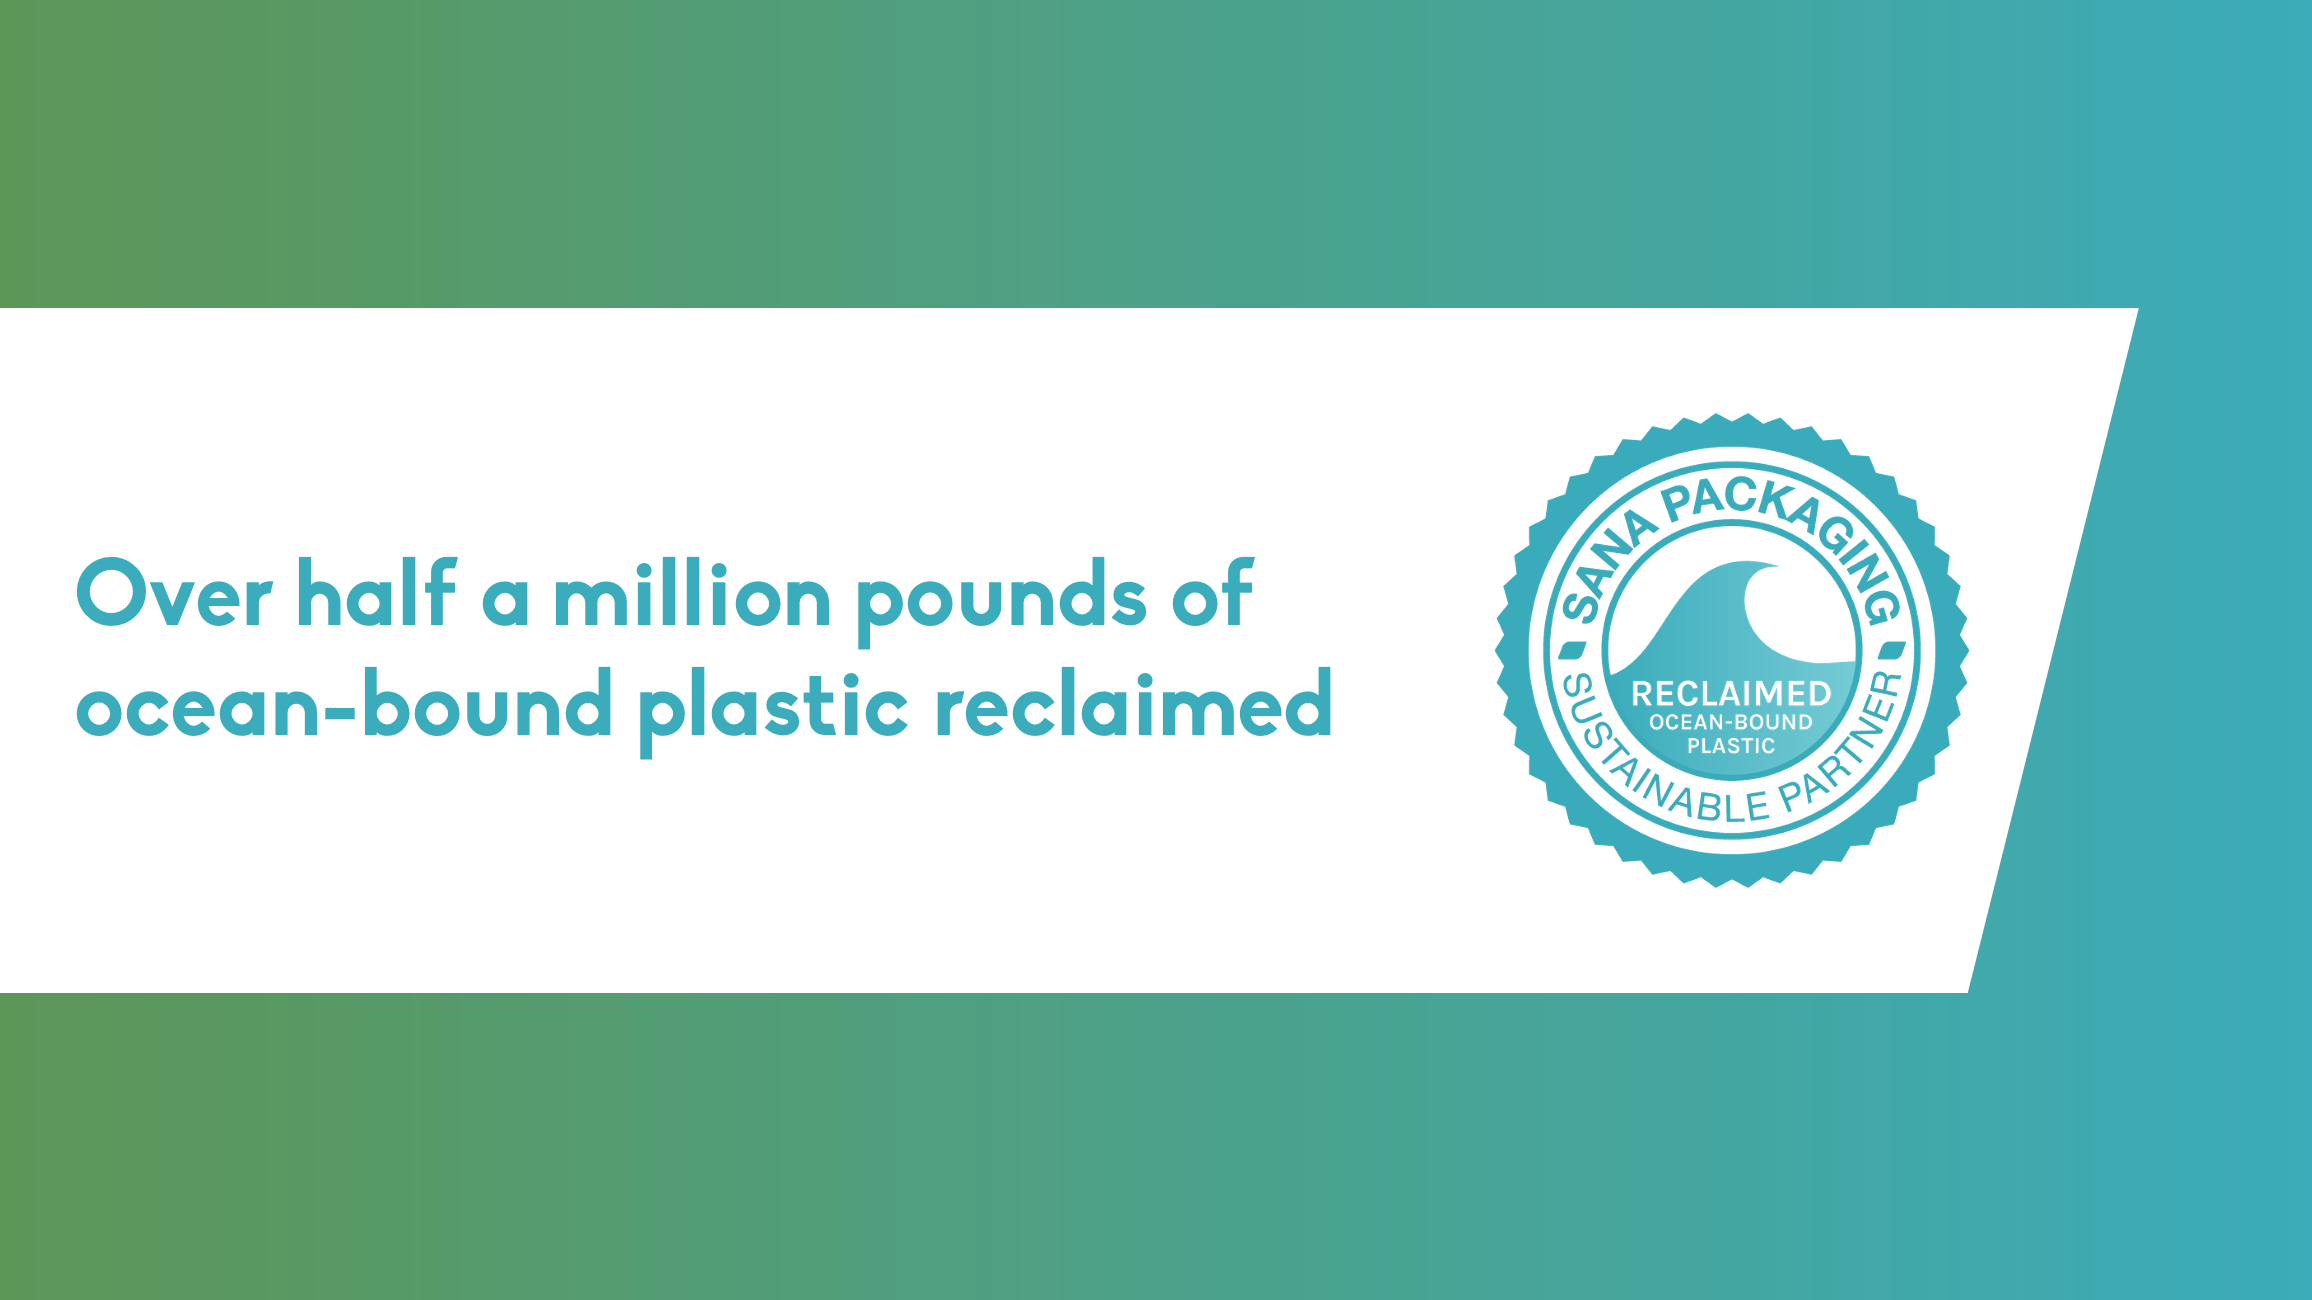 Over Half a Million Pounds of Ocean-Bound Plastic Reclaimed